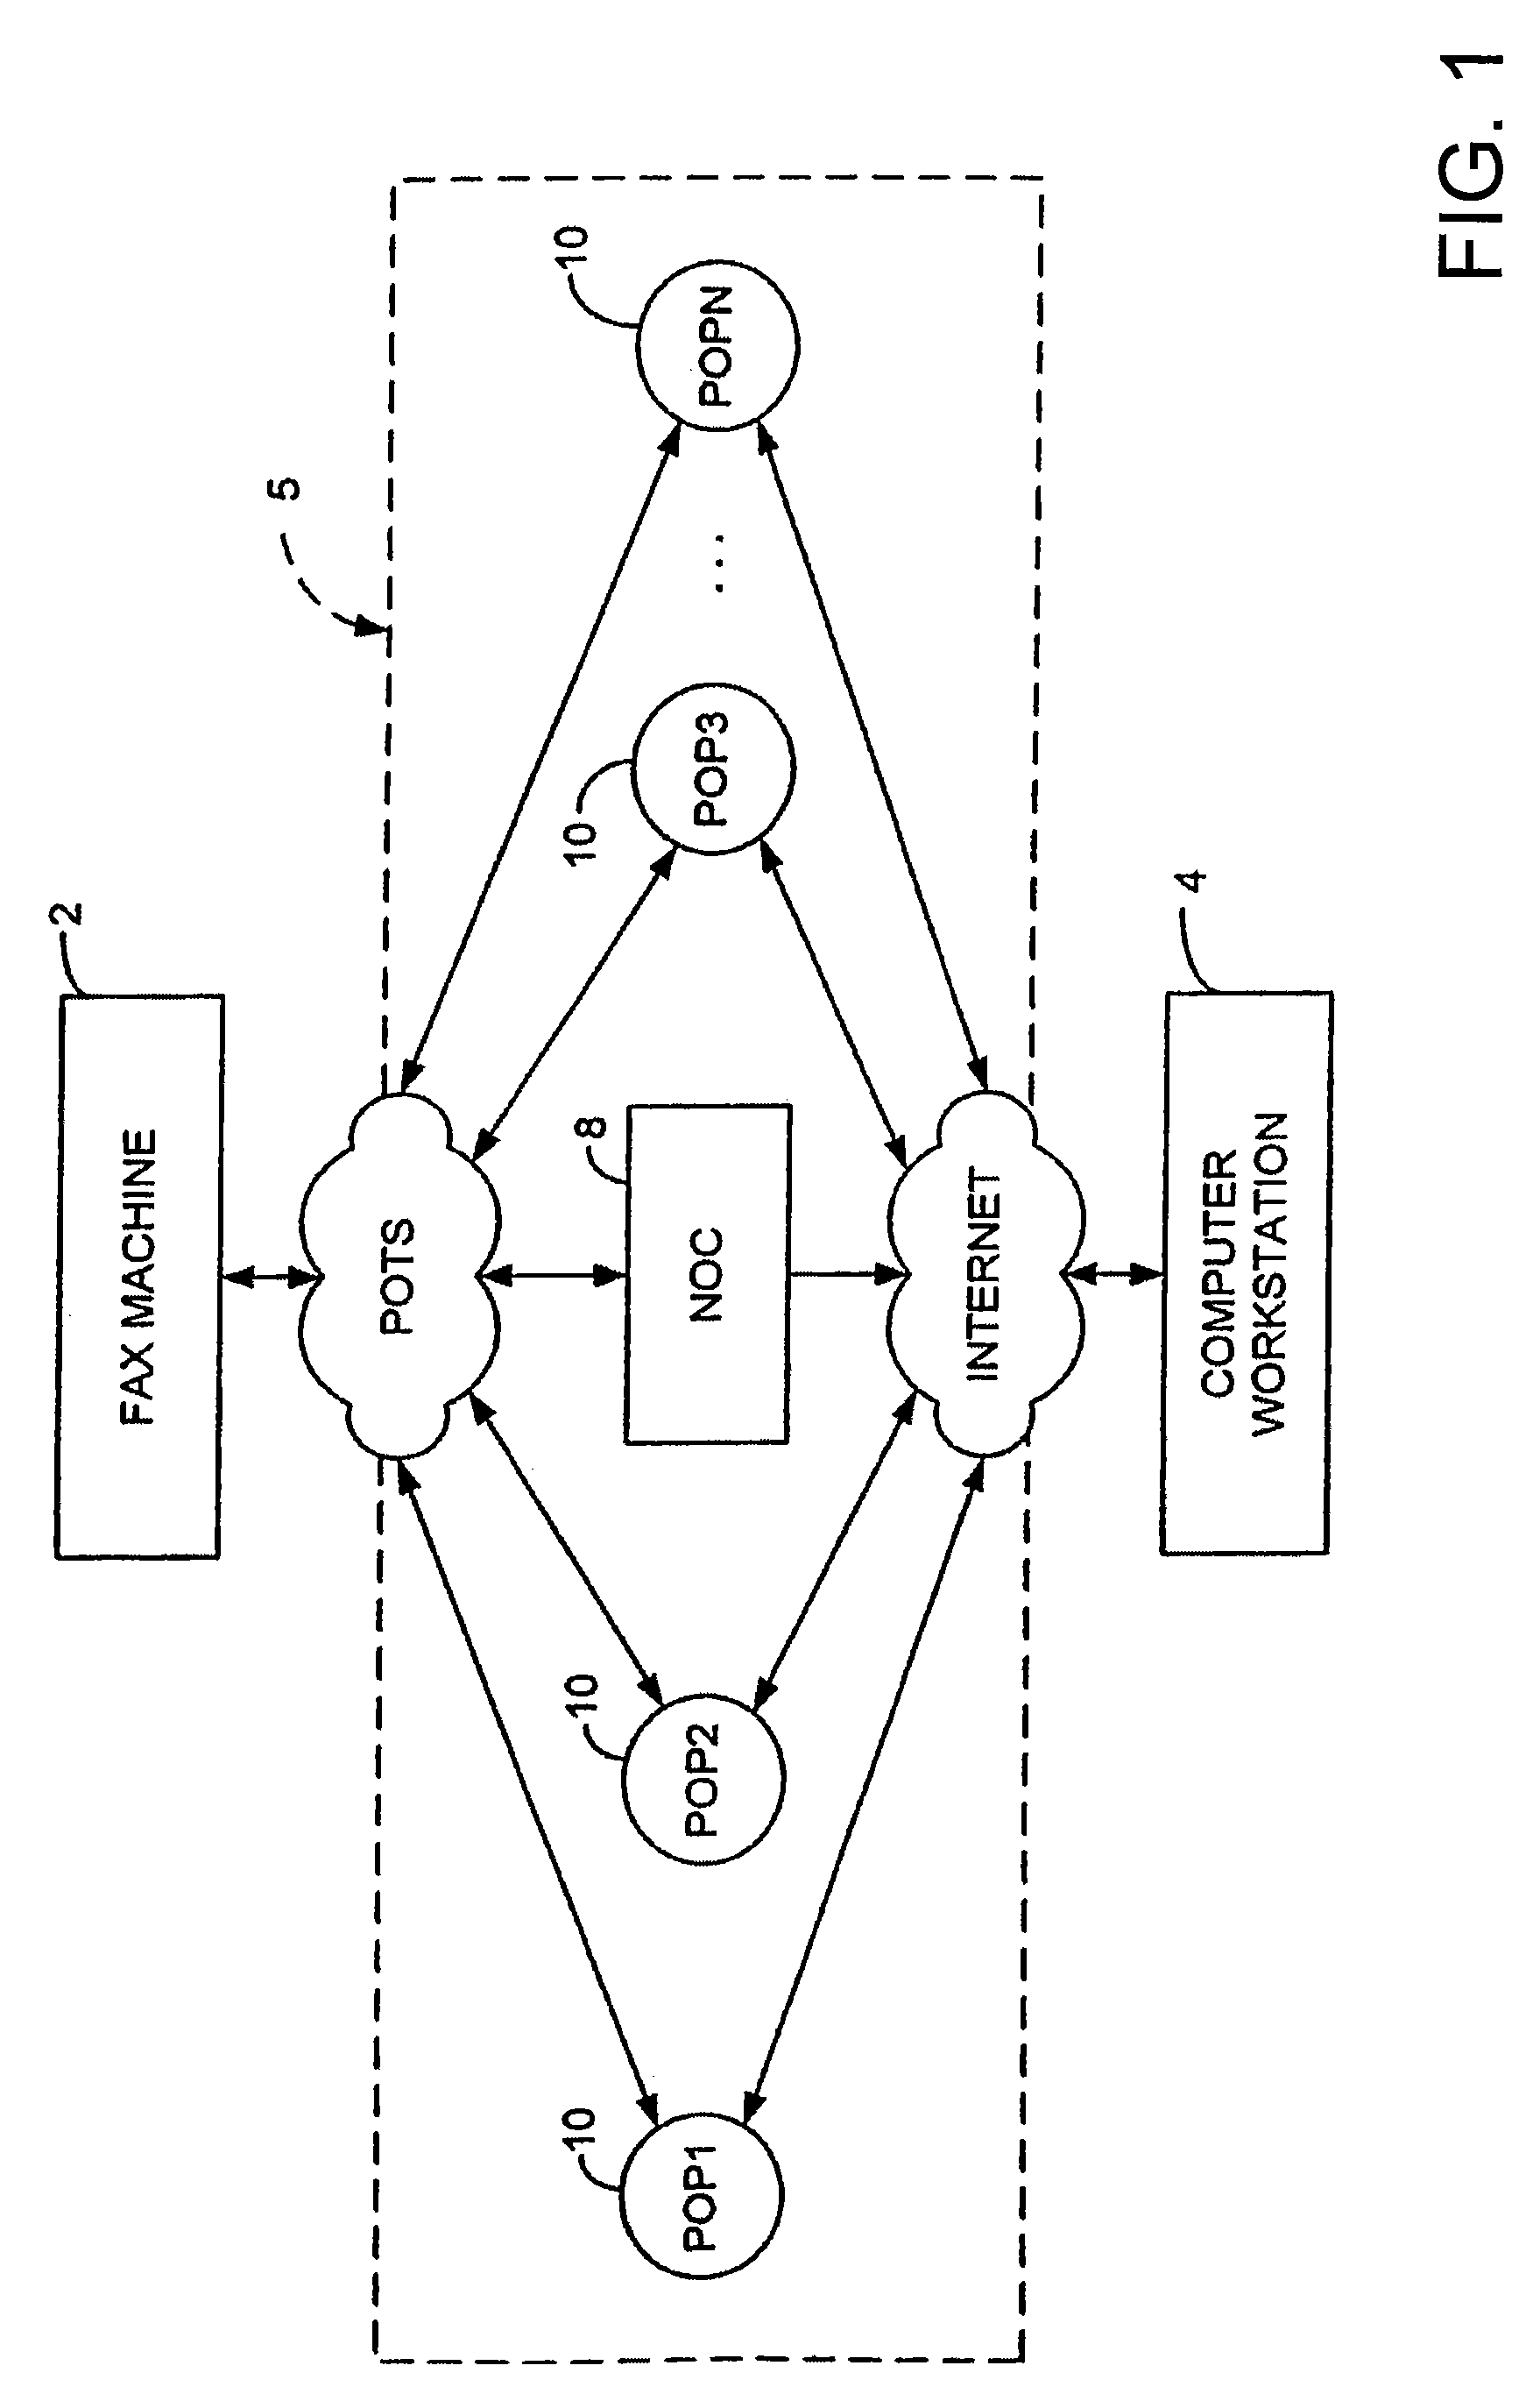 Method and system for transferring digitized representations of documents via computer network transfer protocols